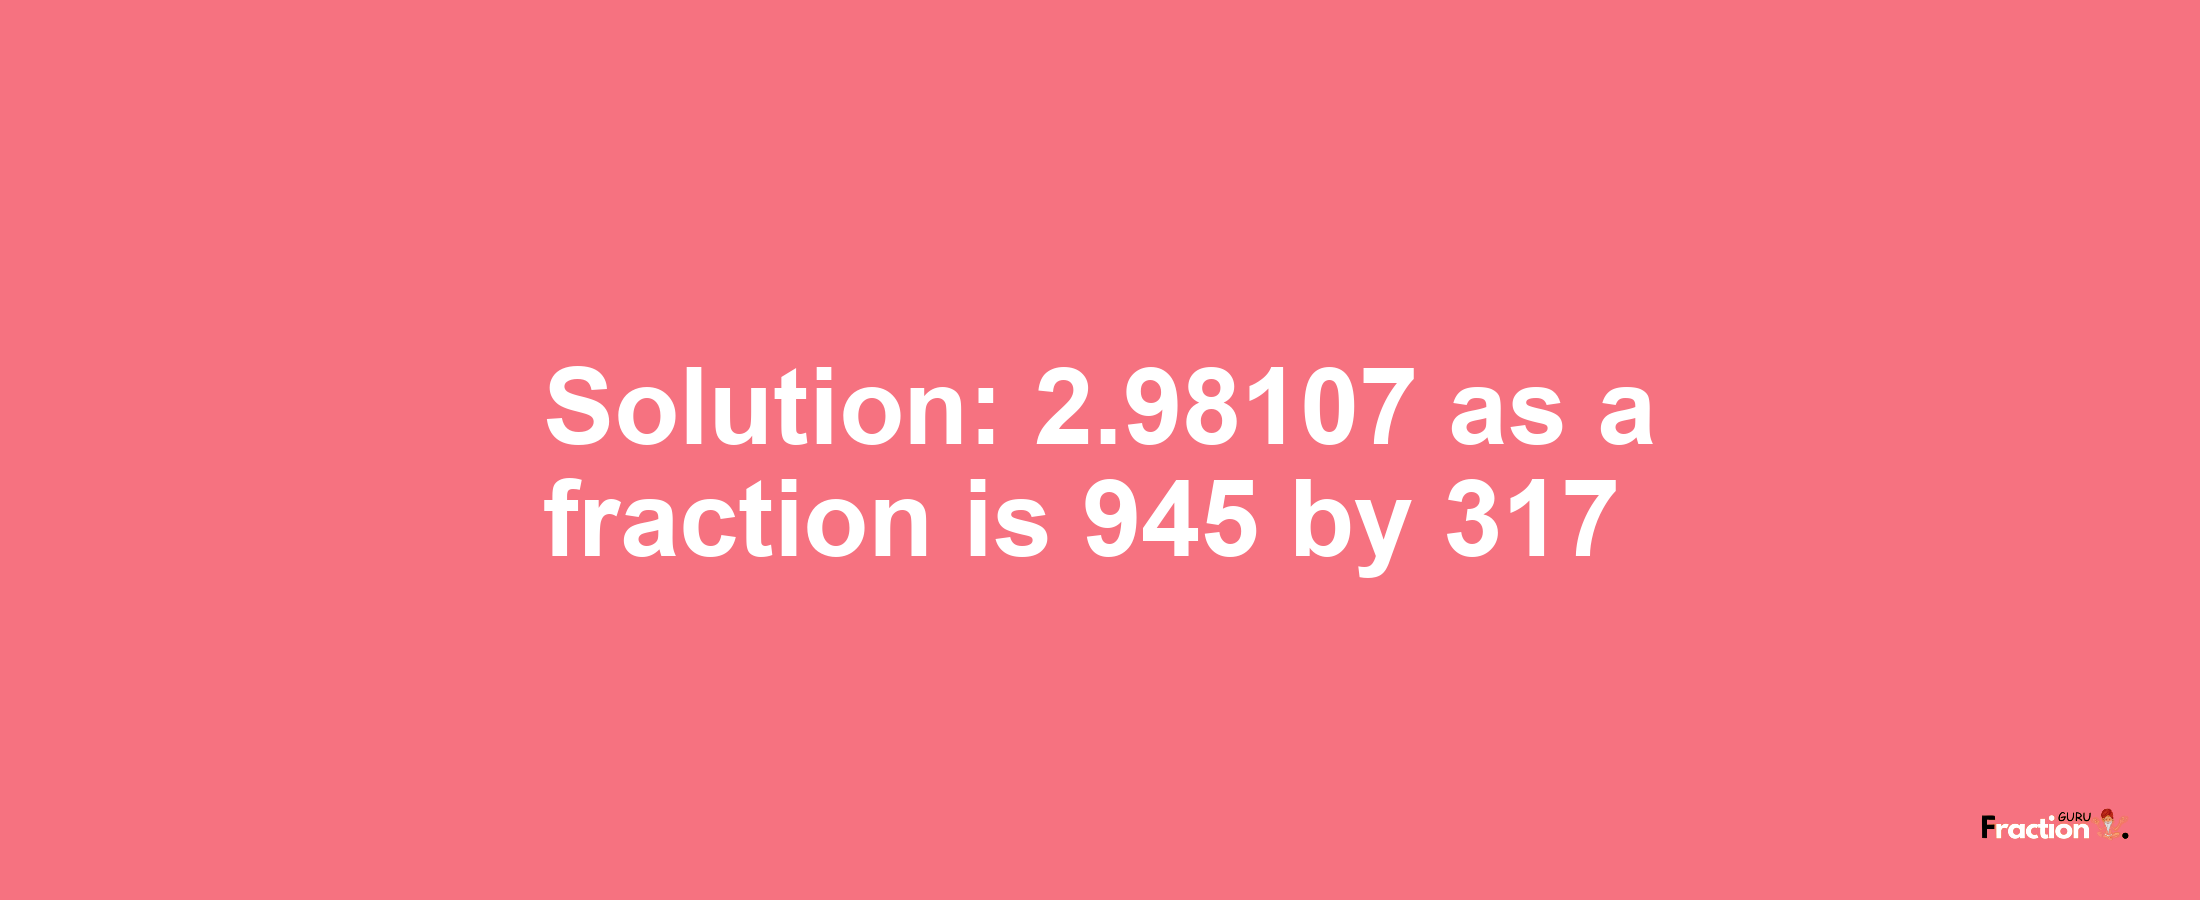 Solution:2.98107 as a fraction is 945/317